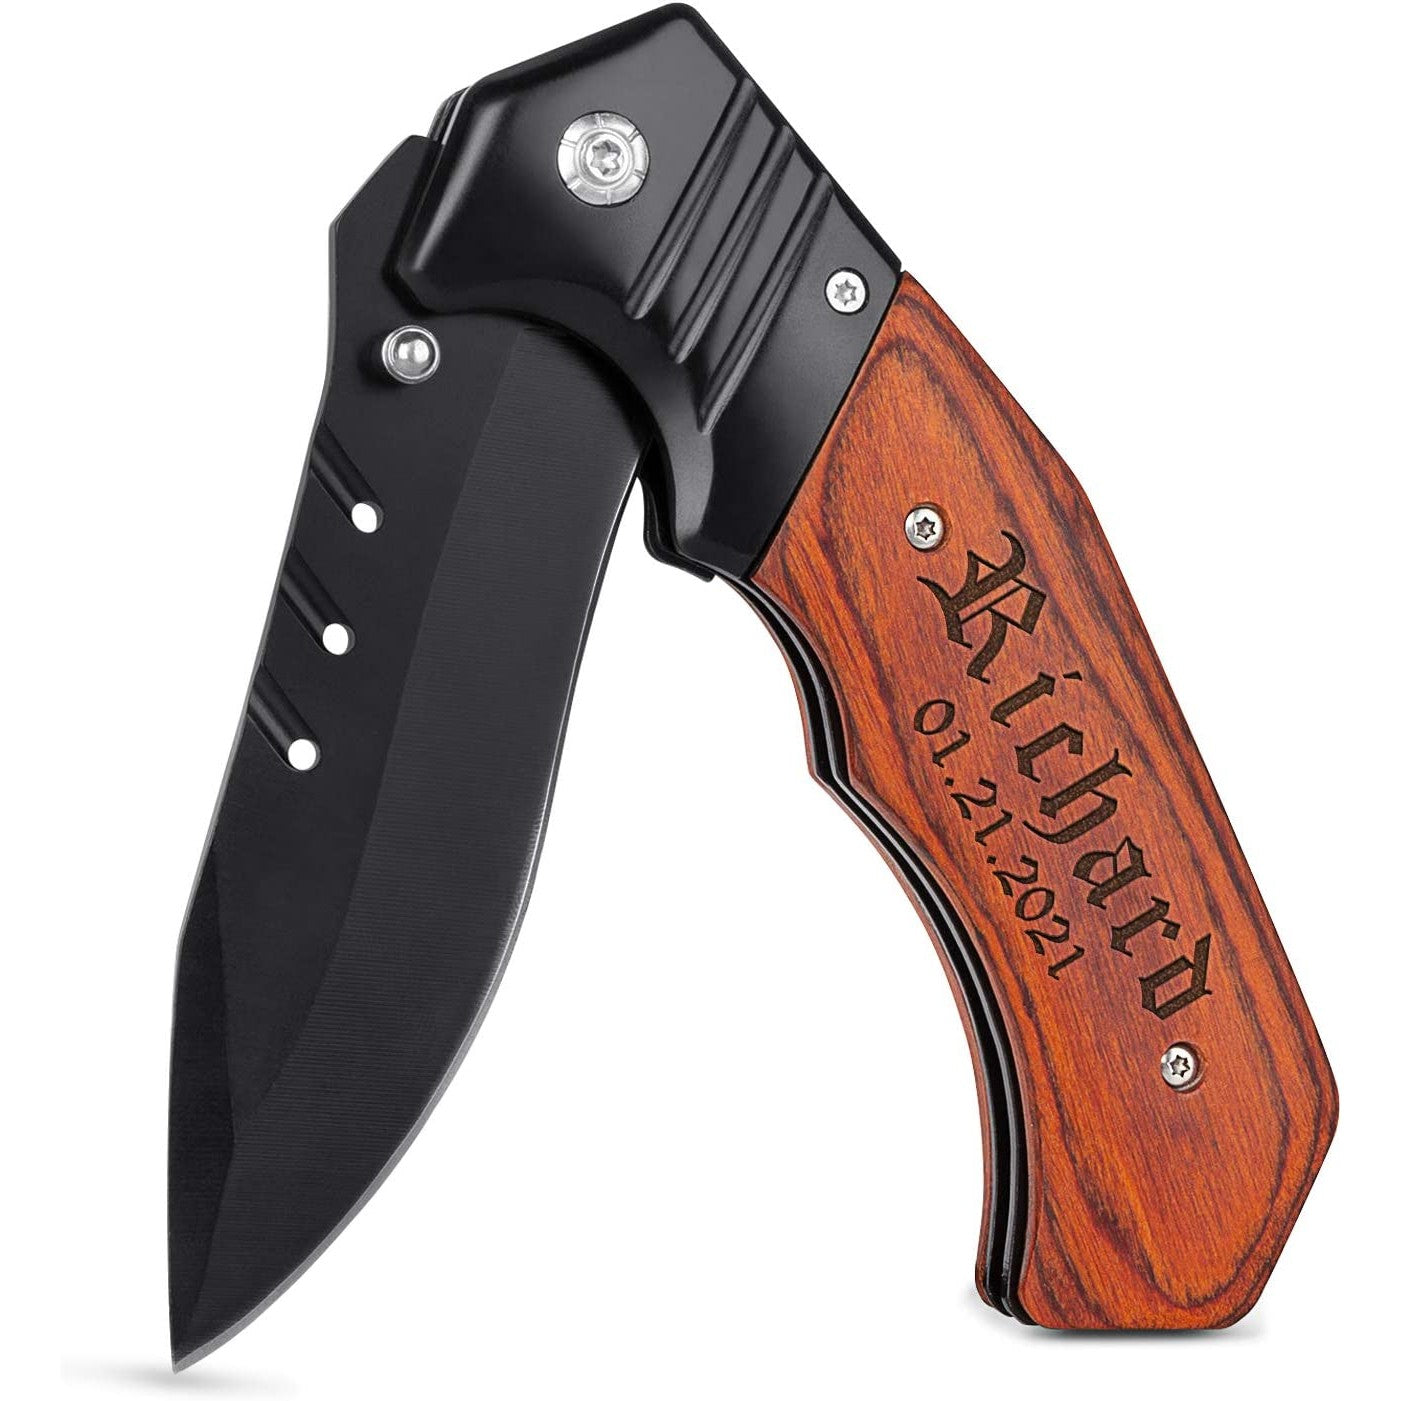 A personalized engraved pocket knife with wooden handle. The engraving says, "Richard 01.21.2021."